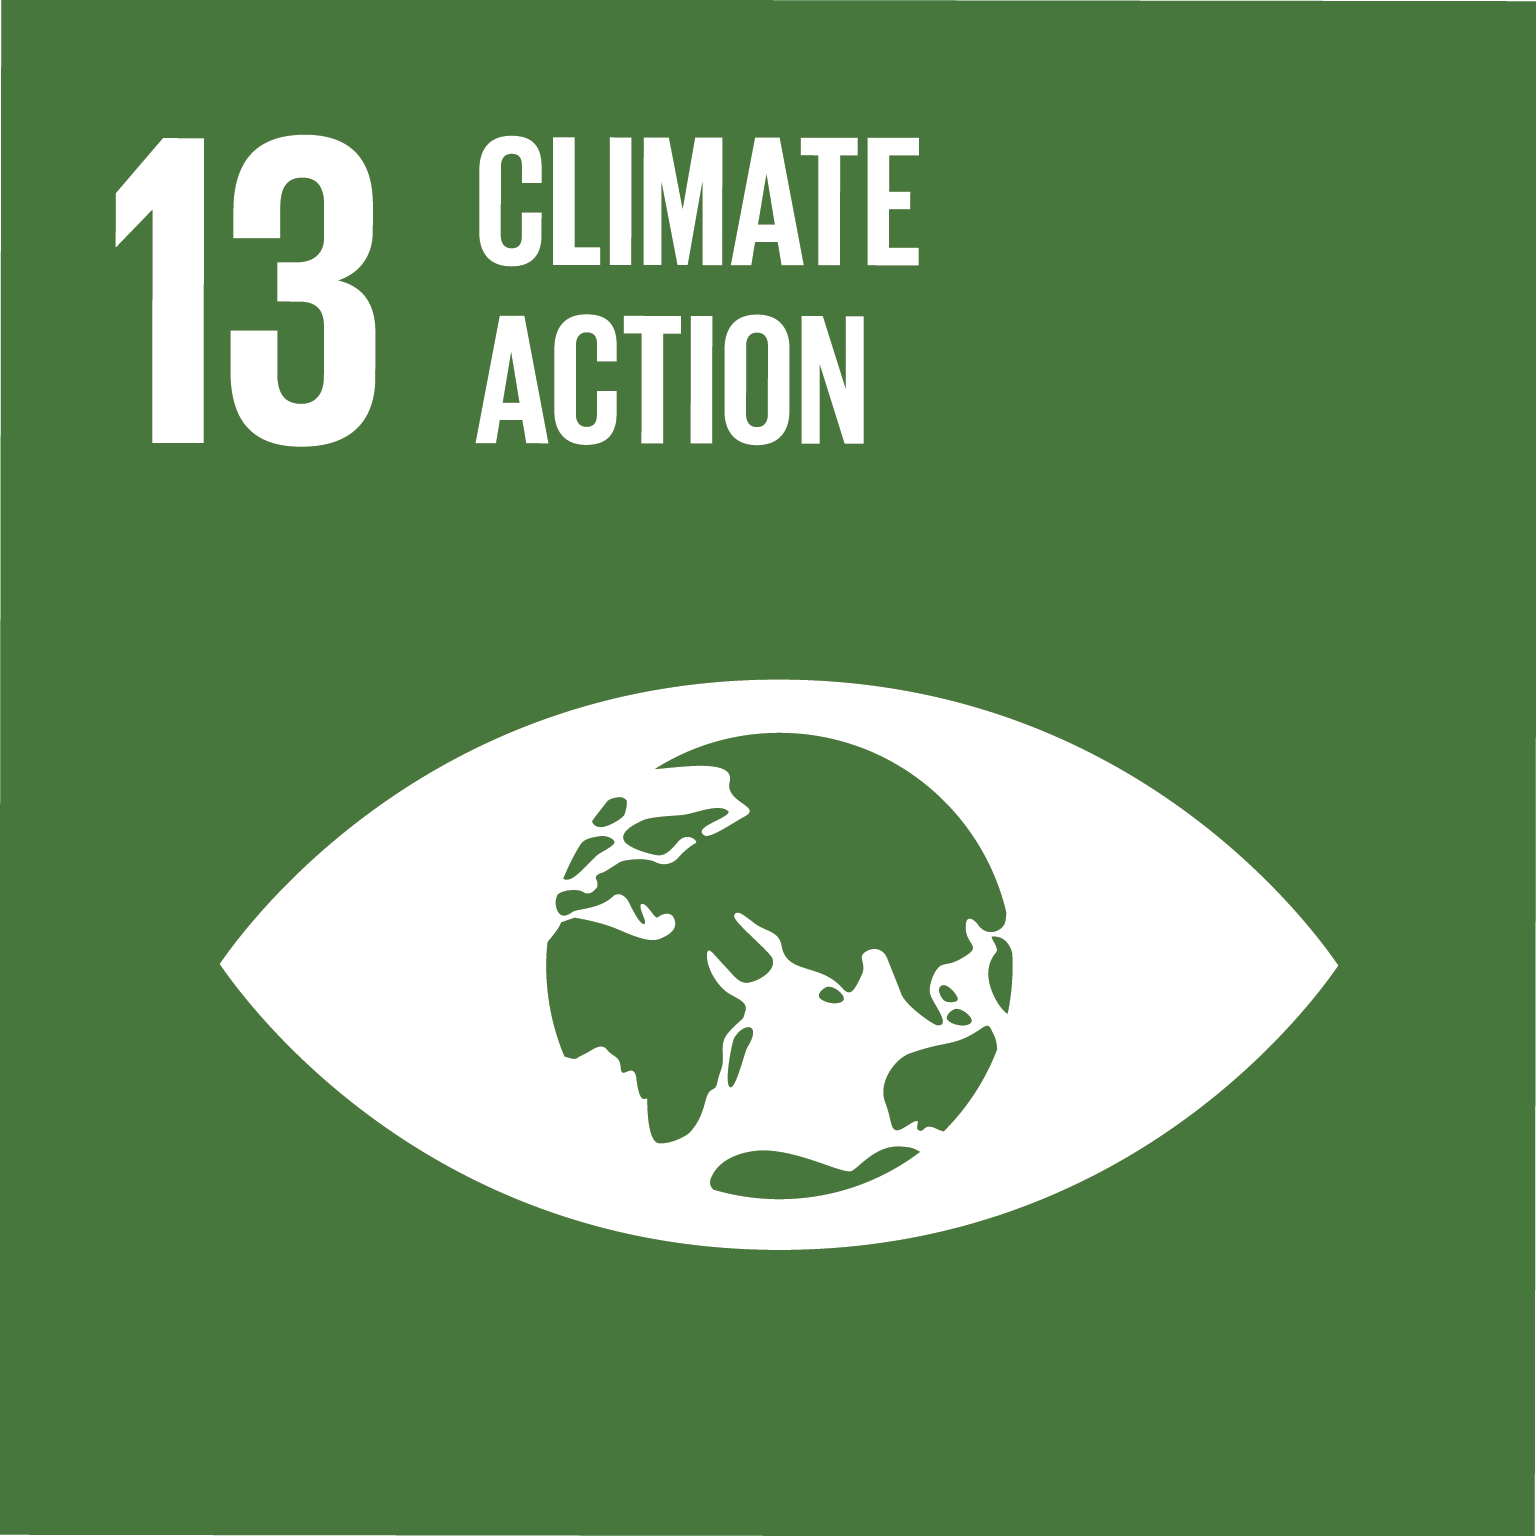 Sustainable Development Goal 13: Climate Action